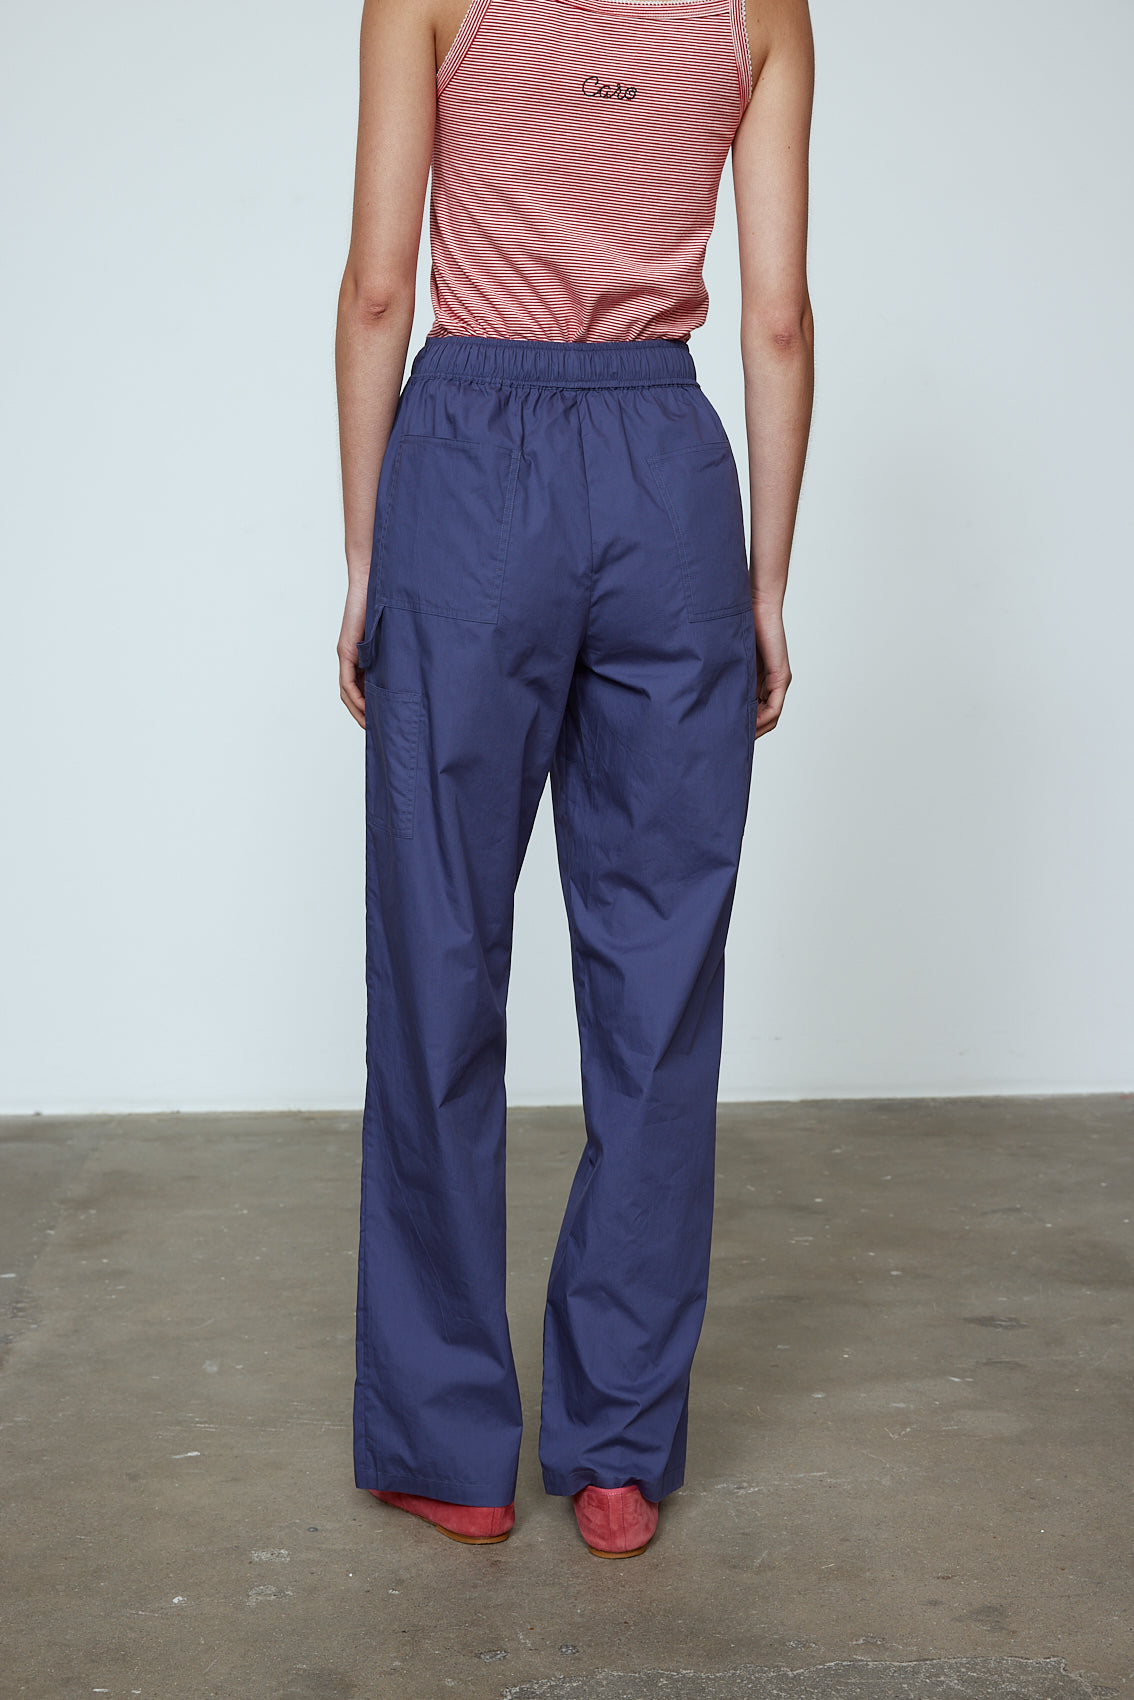 The Hannah Pants are loose-fitted cotton poplin-style pants.  Style them with the matching Hannah Shirt or a classic t-shirt.  Material: 100% cotton.  The model is 179cm (5'10") and wears size S.